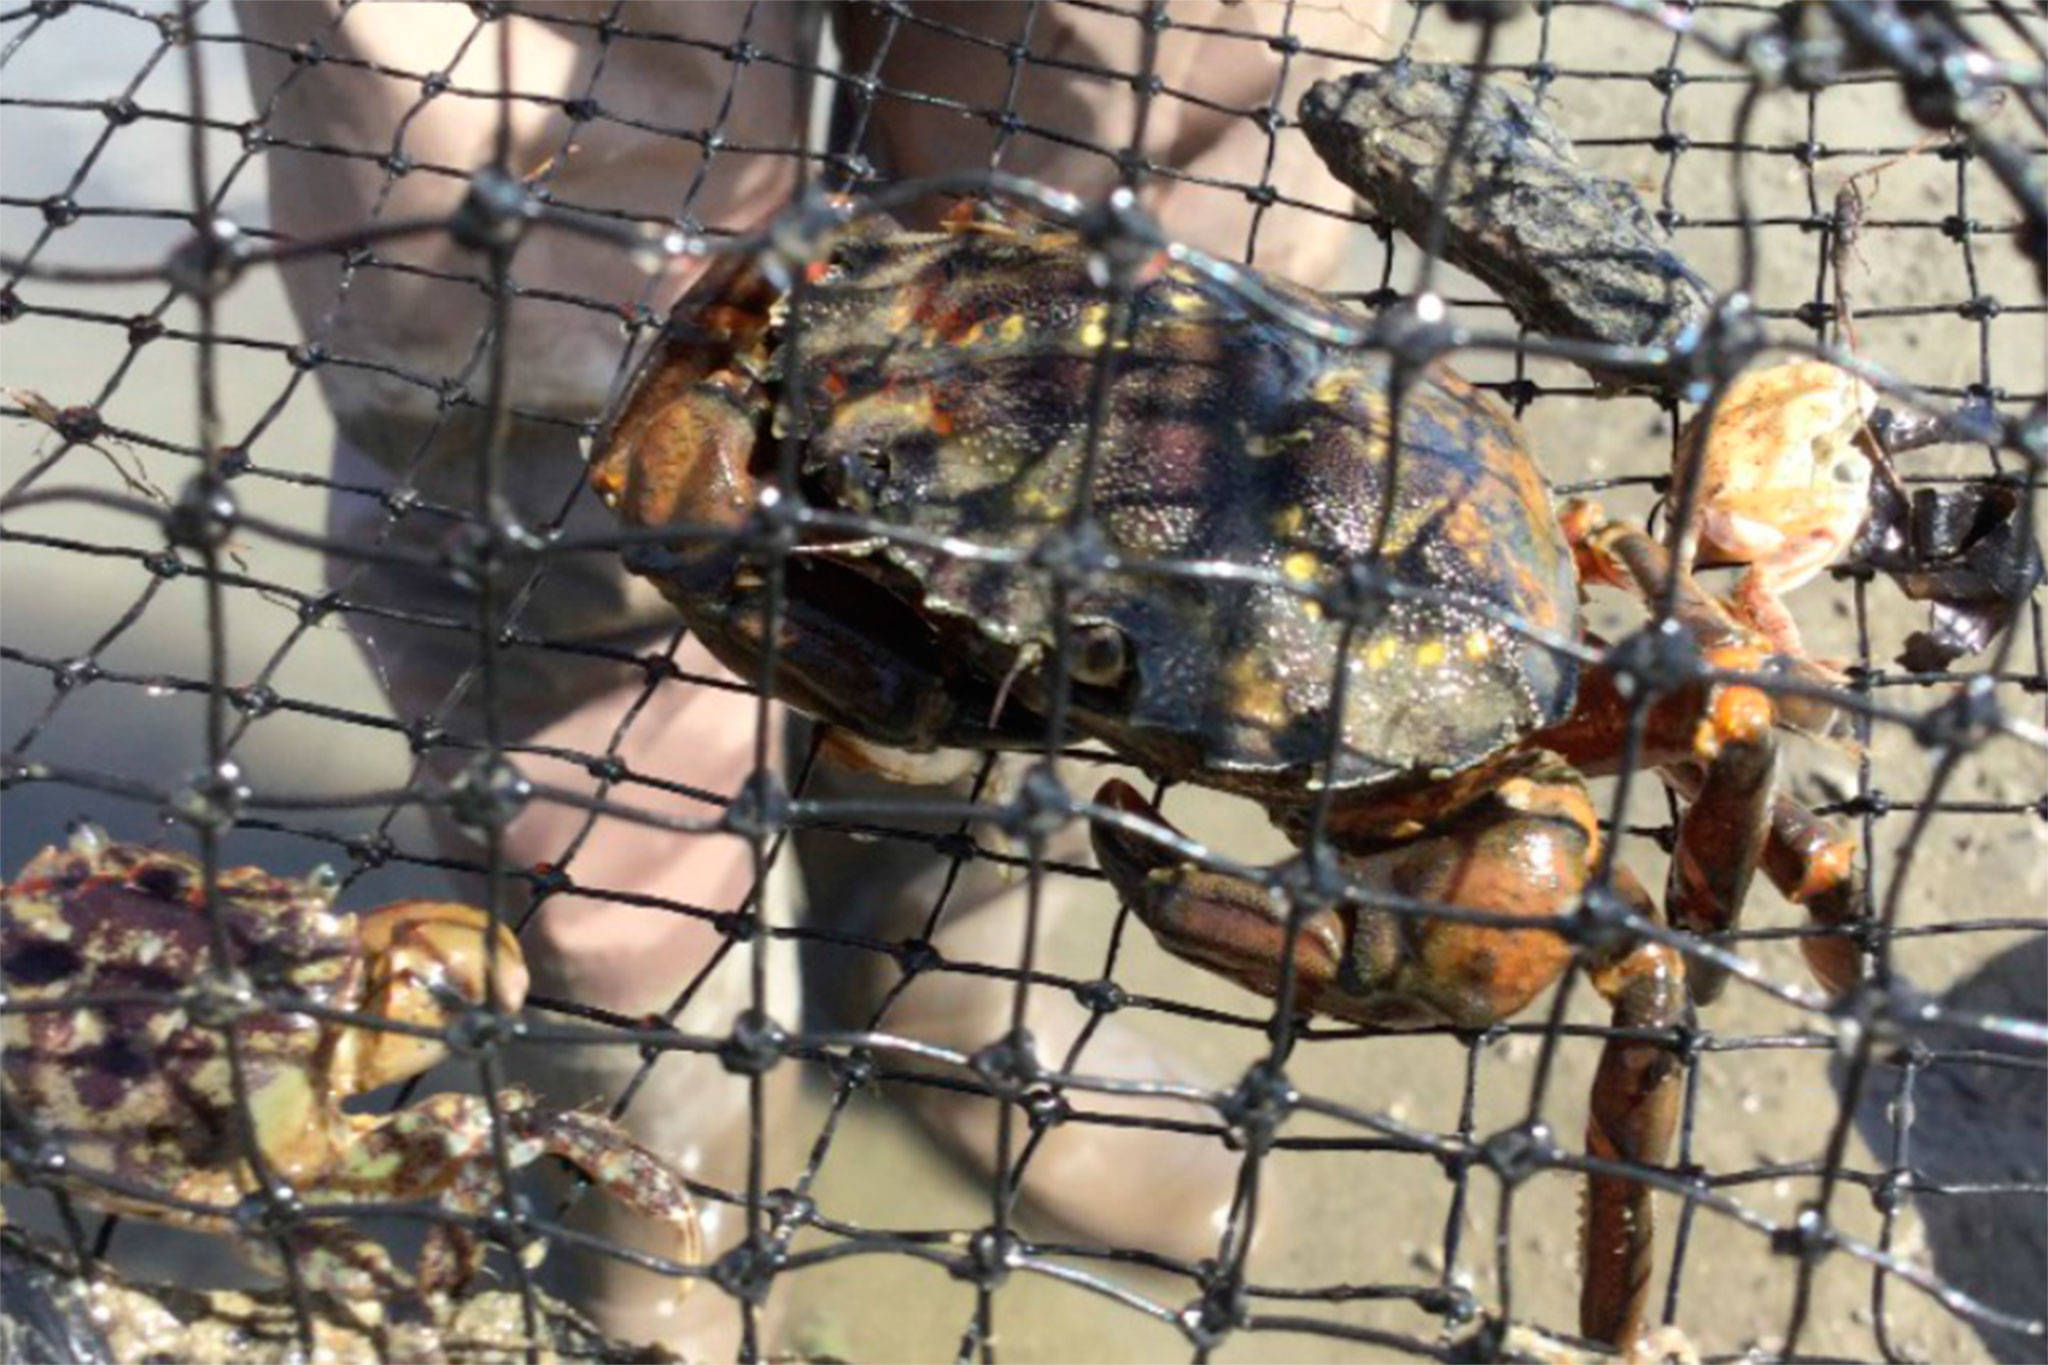 Since 2017, resources managers and volunteers at the Washington National Wildlife Refuge have placed more than 10,800 traps to catch the European green crab. They hope their efforts have dwindled the population enough to switch to a monthly monitoring program. Photo courtesy of USFWS